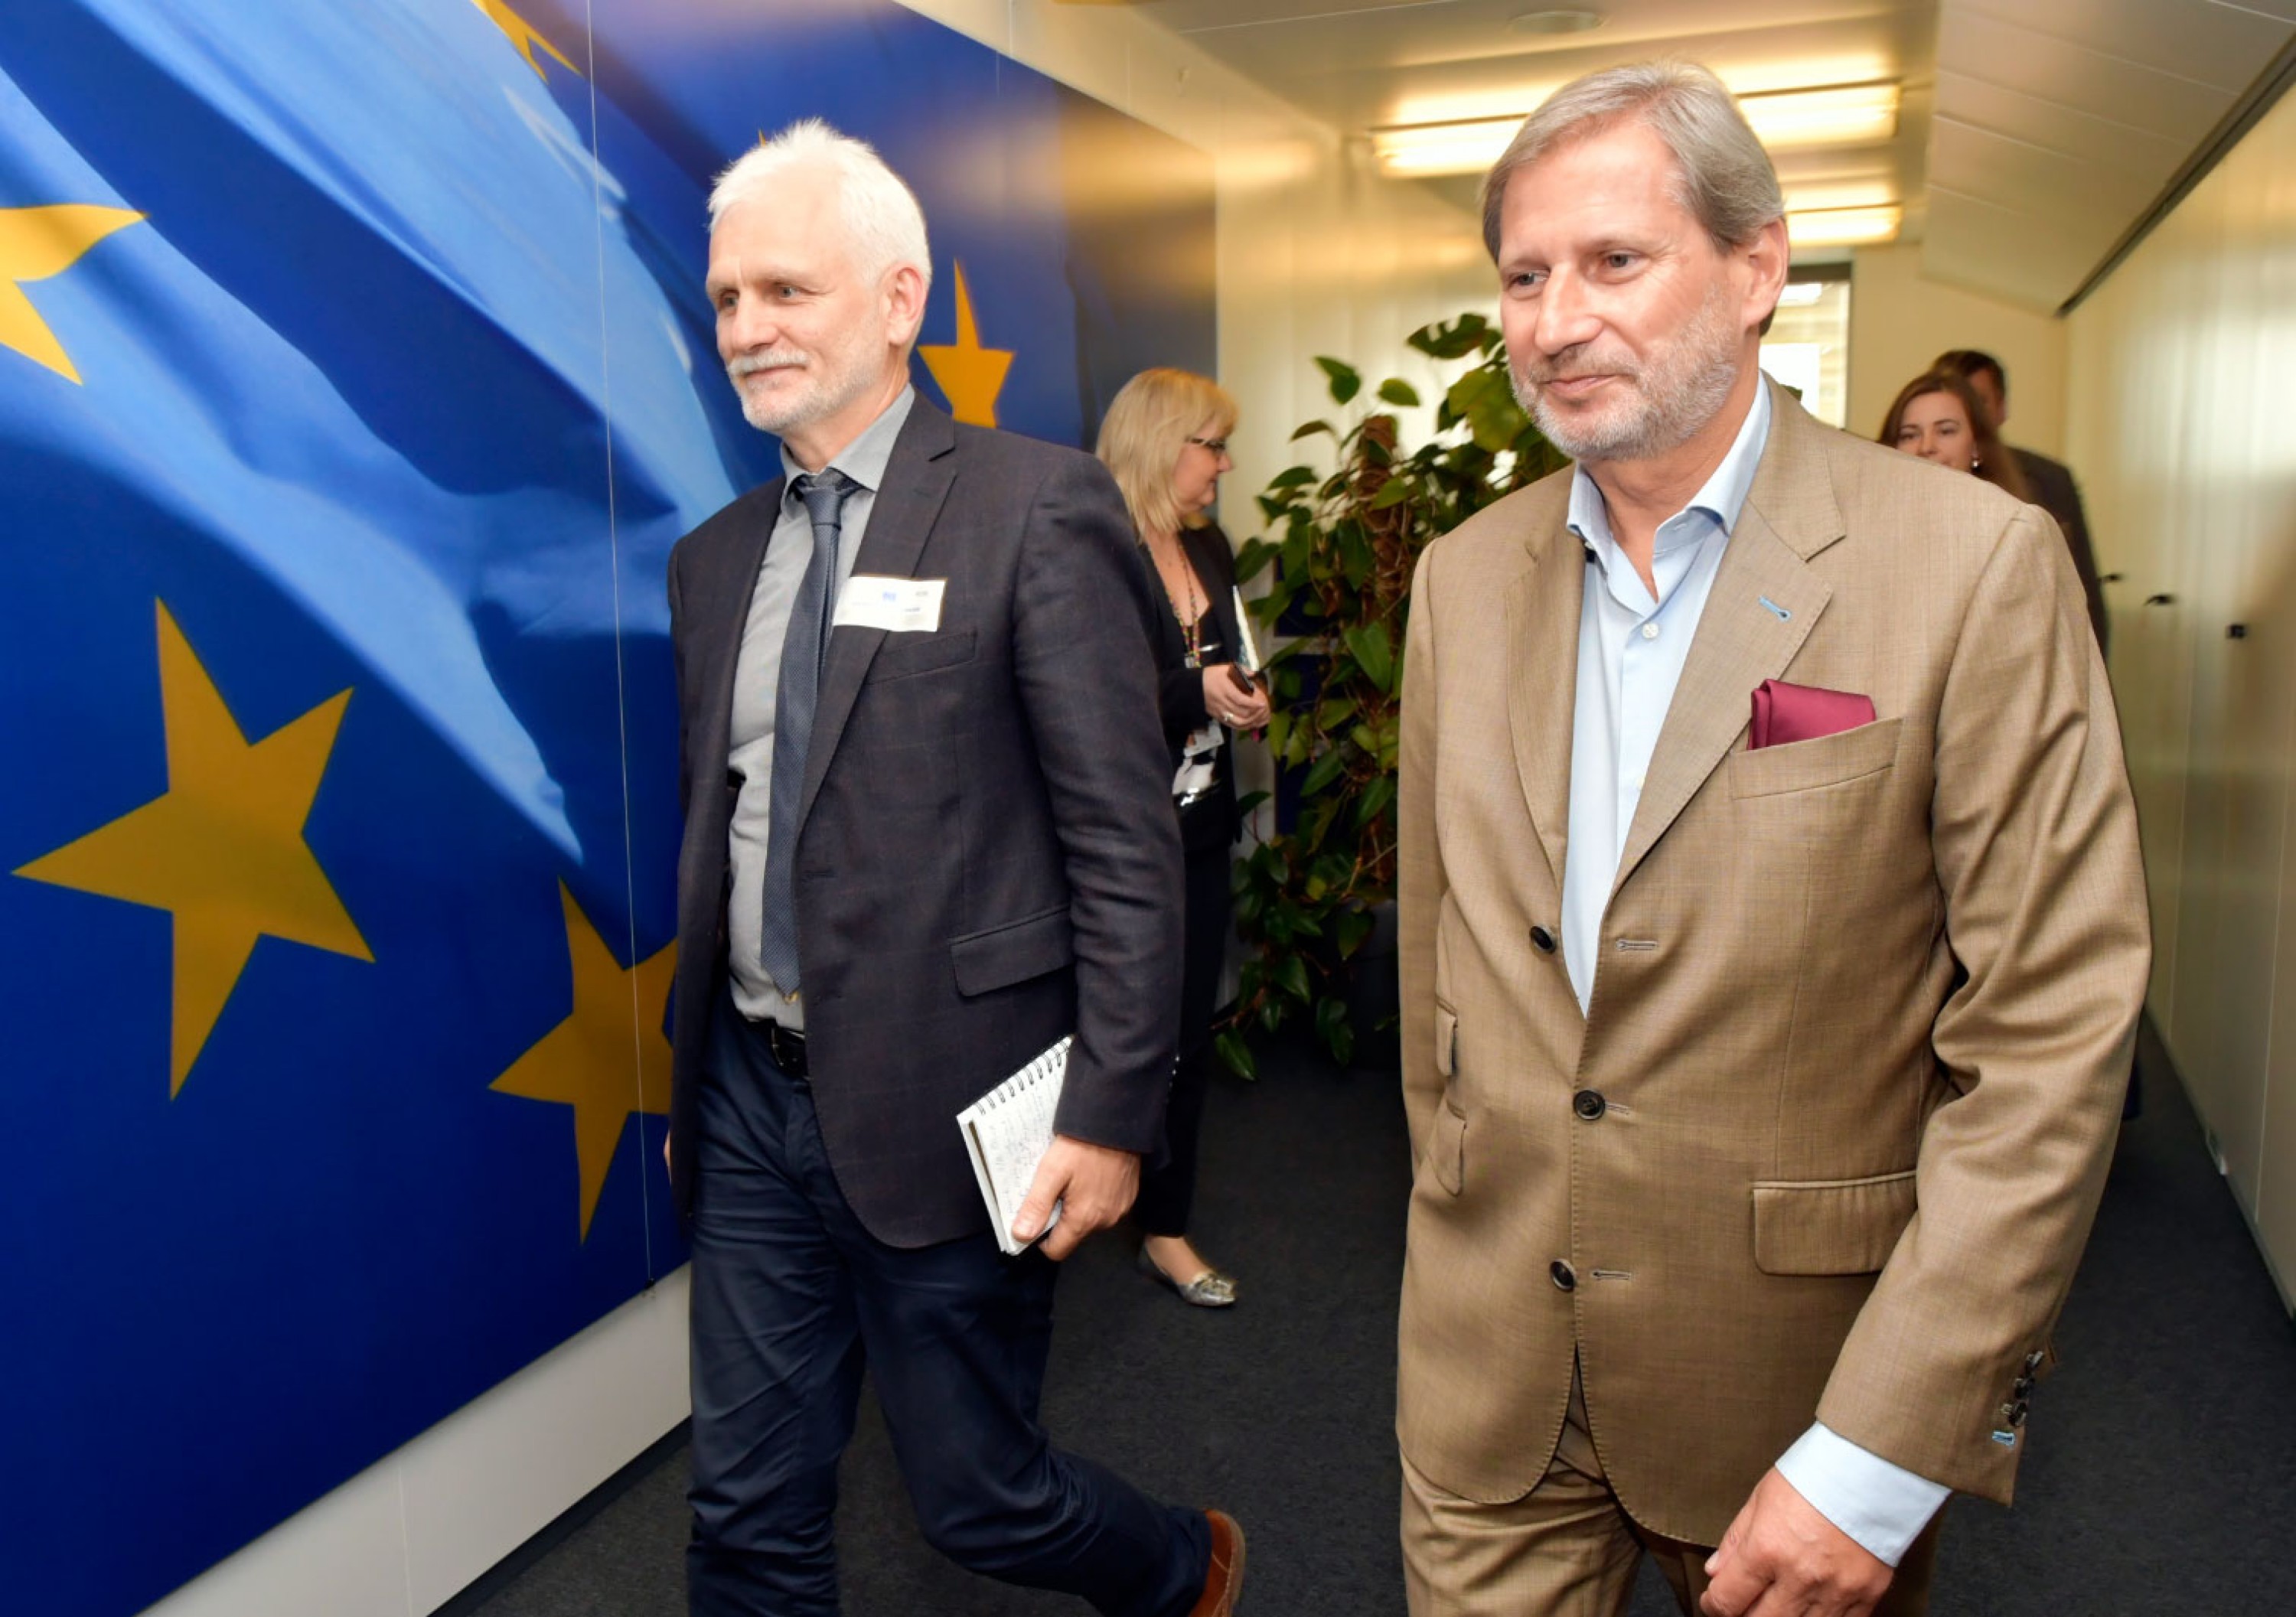 Head of Viasna Ales Bialiatski with Johannes Hahn, Commissioner at Neighborhood and Enlargement Negotiations department at the meeting in Brussels, June 28, 2017